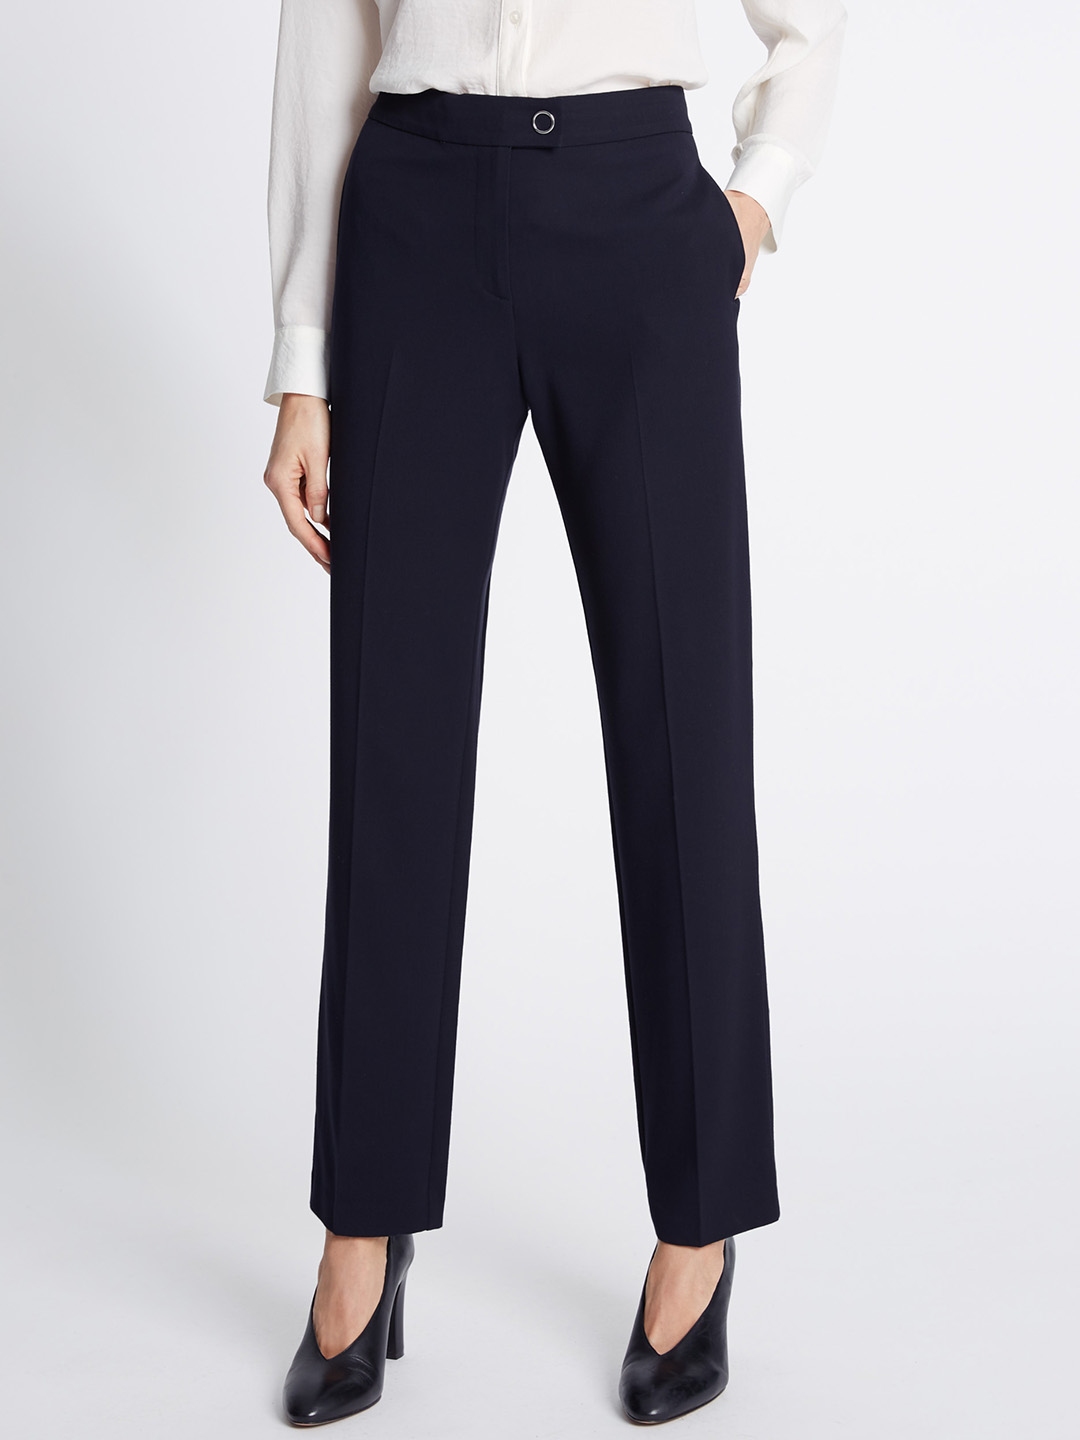 TINTED Trousers and Pants  Buy TINTED Sky Blue Formal Pants For Women  Online  Nykaa Fashion